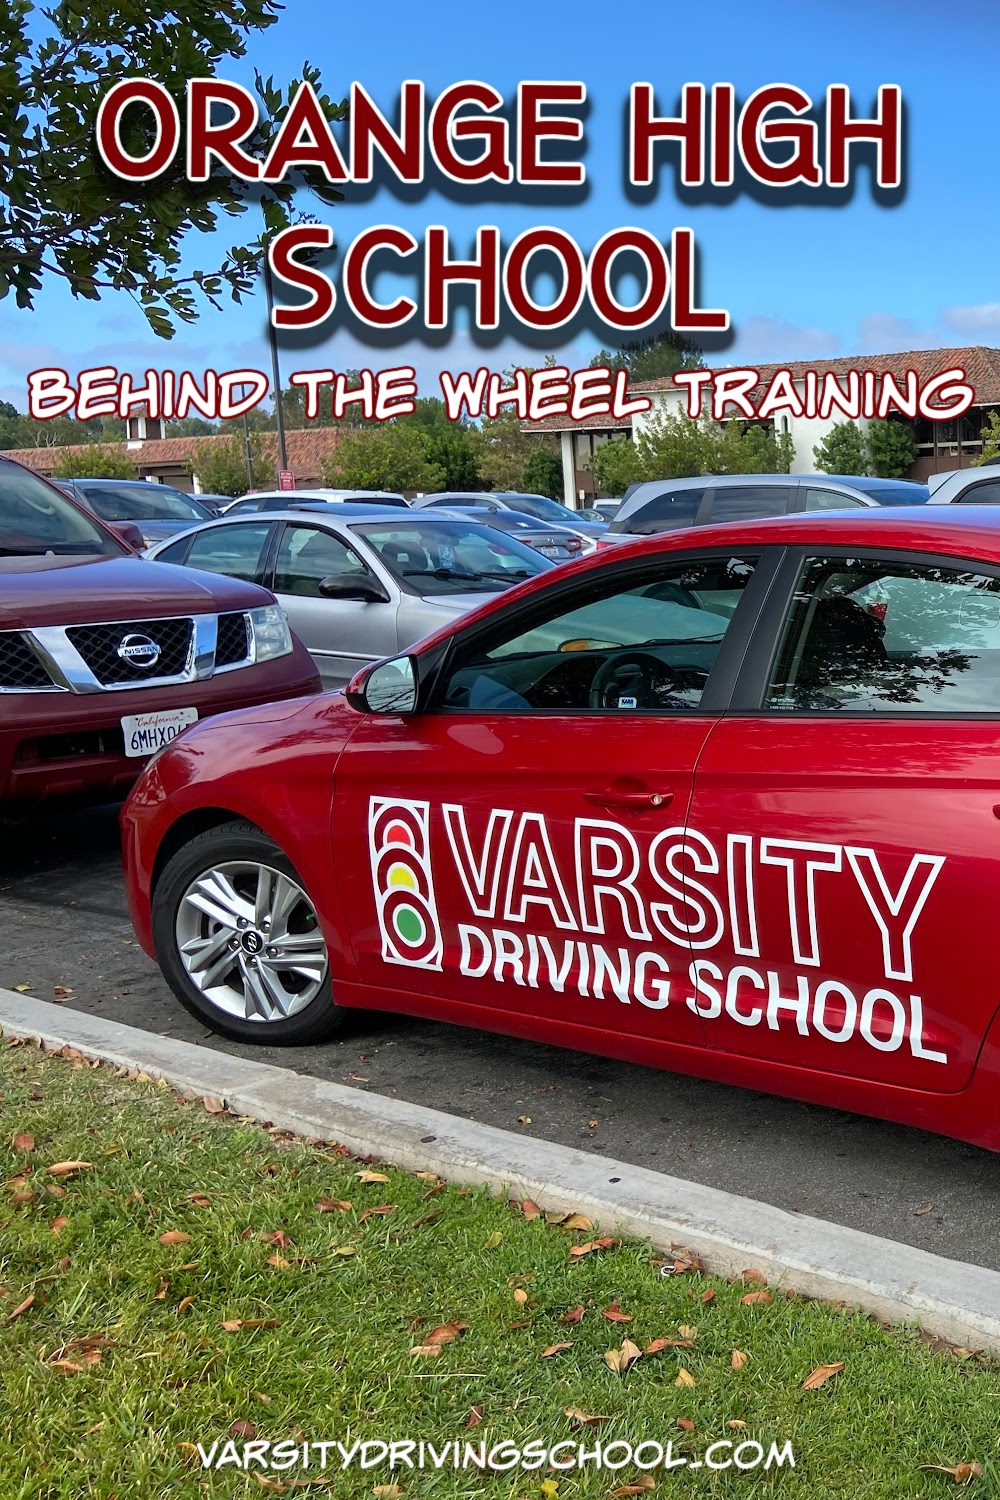 Varsity Driving School provides students with the best Orange High School behind the wheel training services.